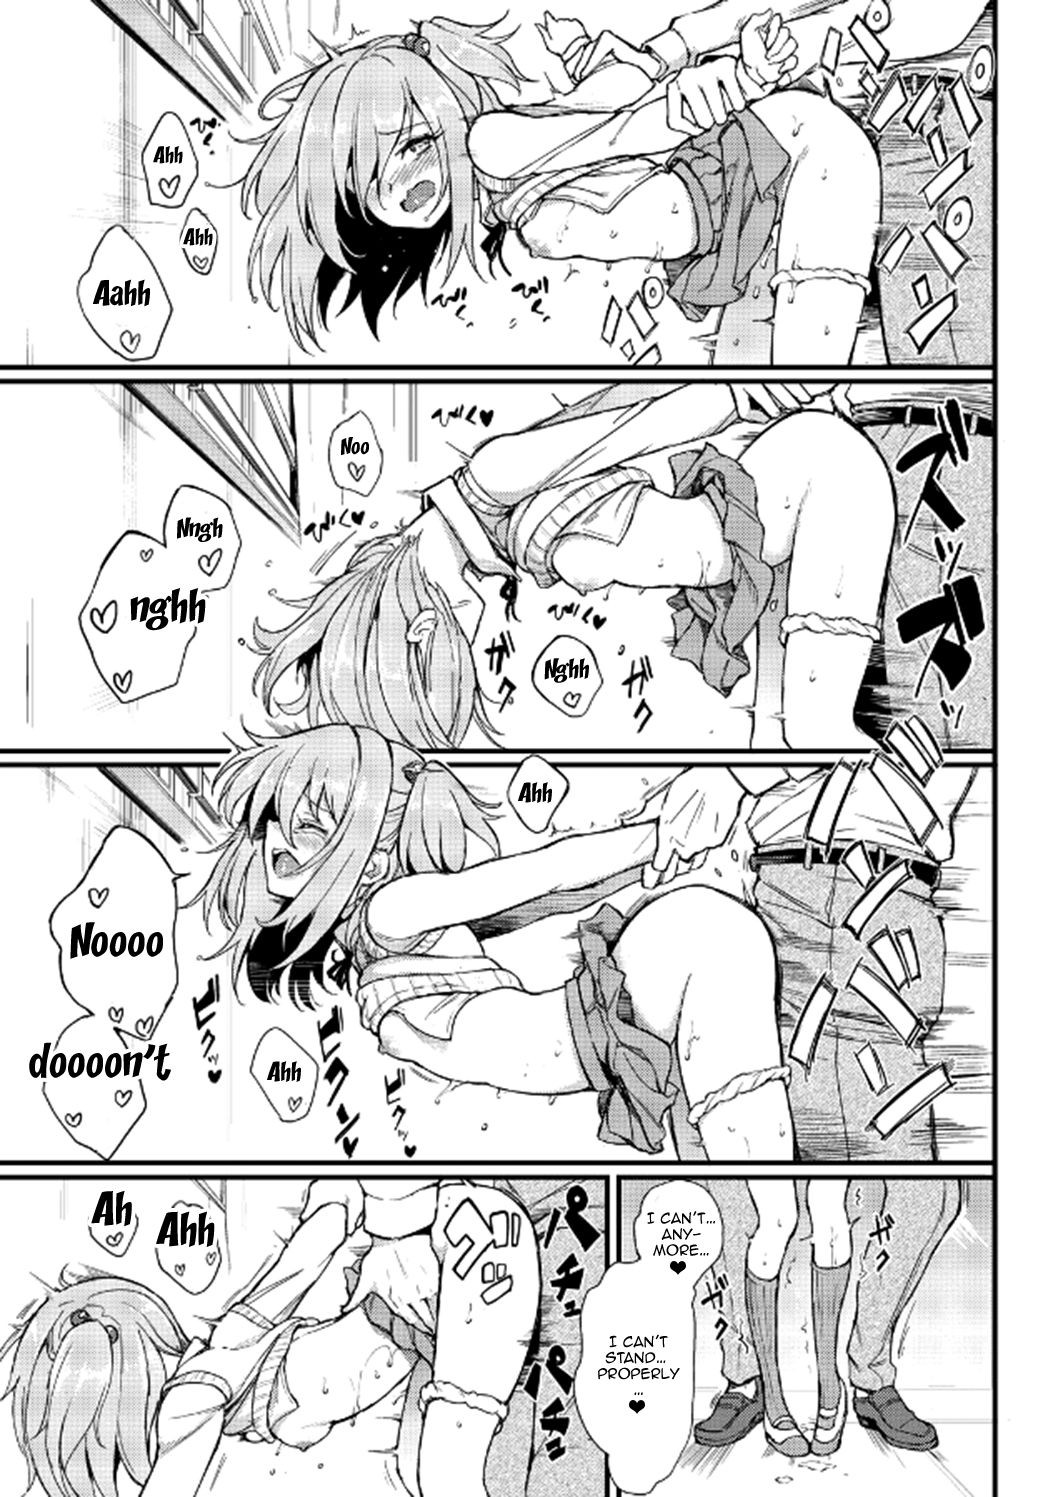 Lovely Aina-chan - Chapter 1 porn comic picture 23